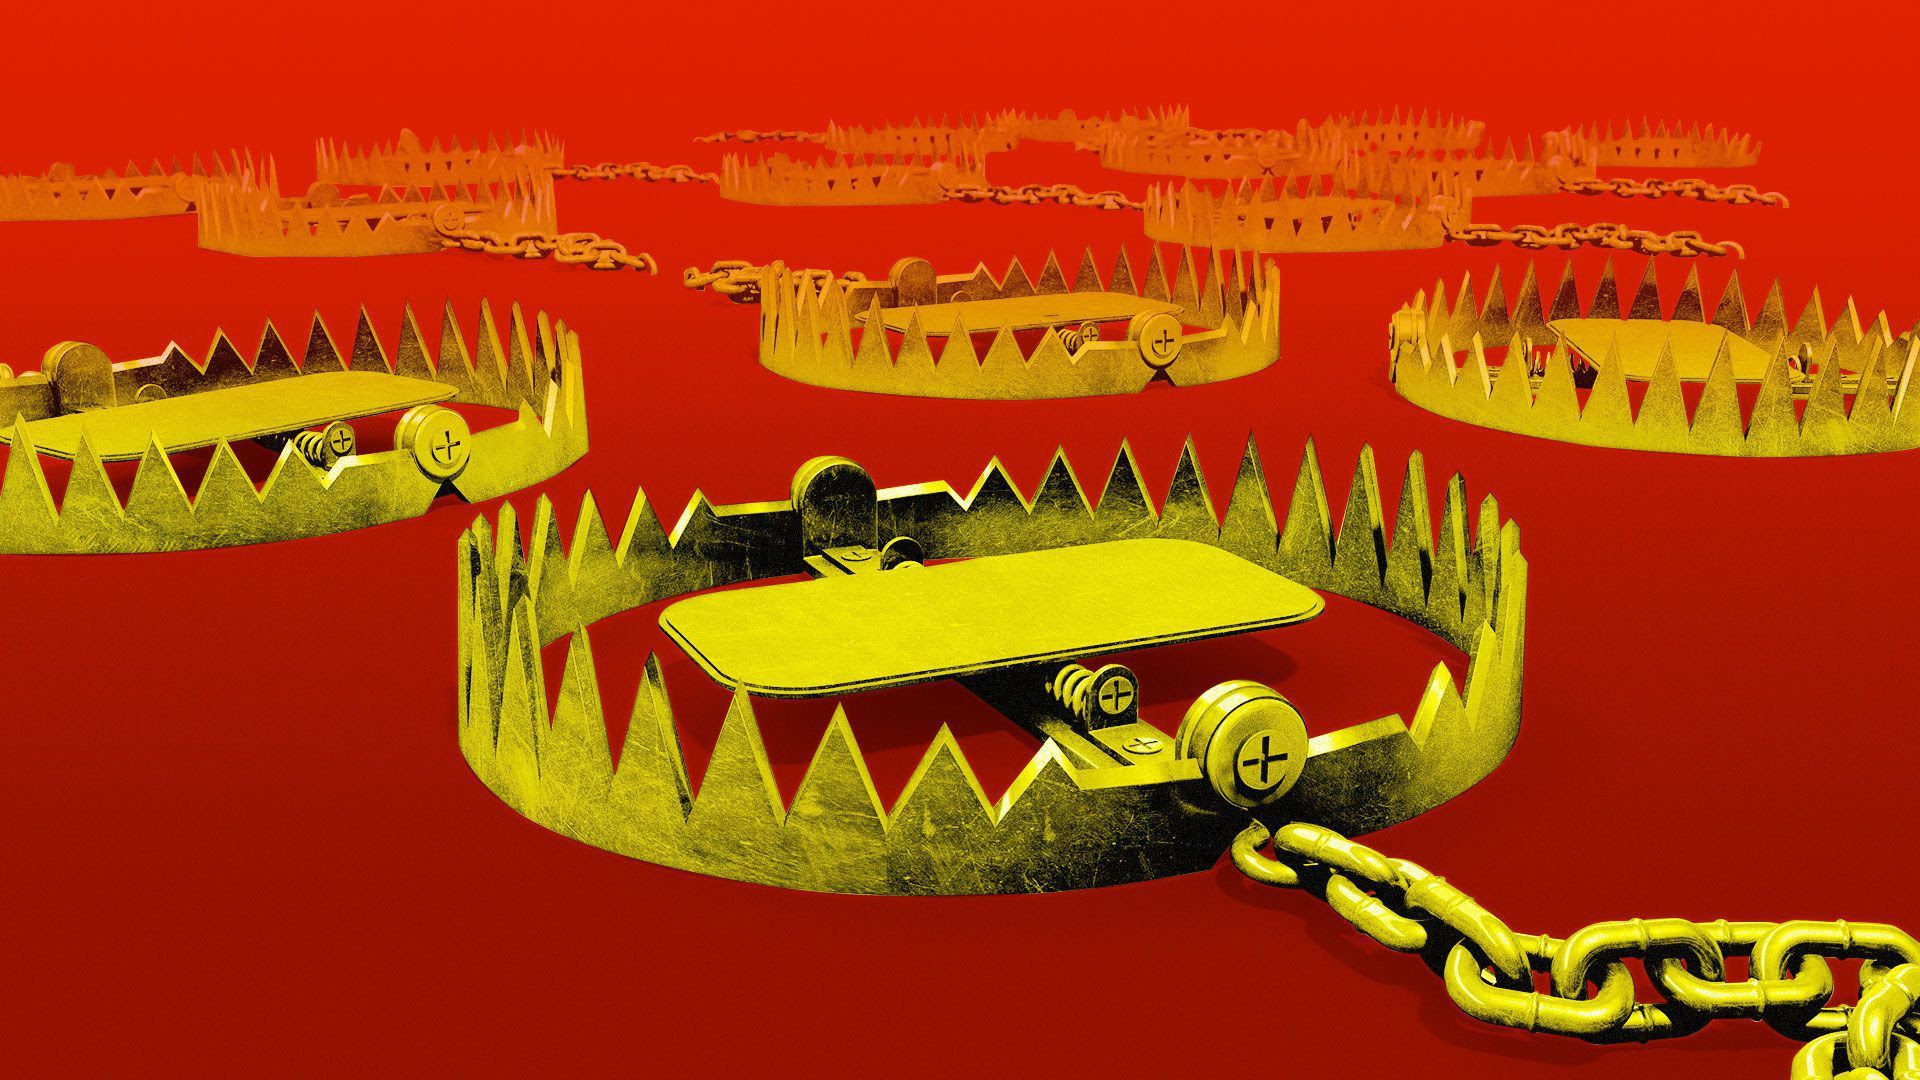 an image of bear traps in red and yellow